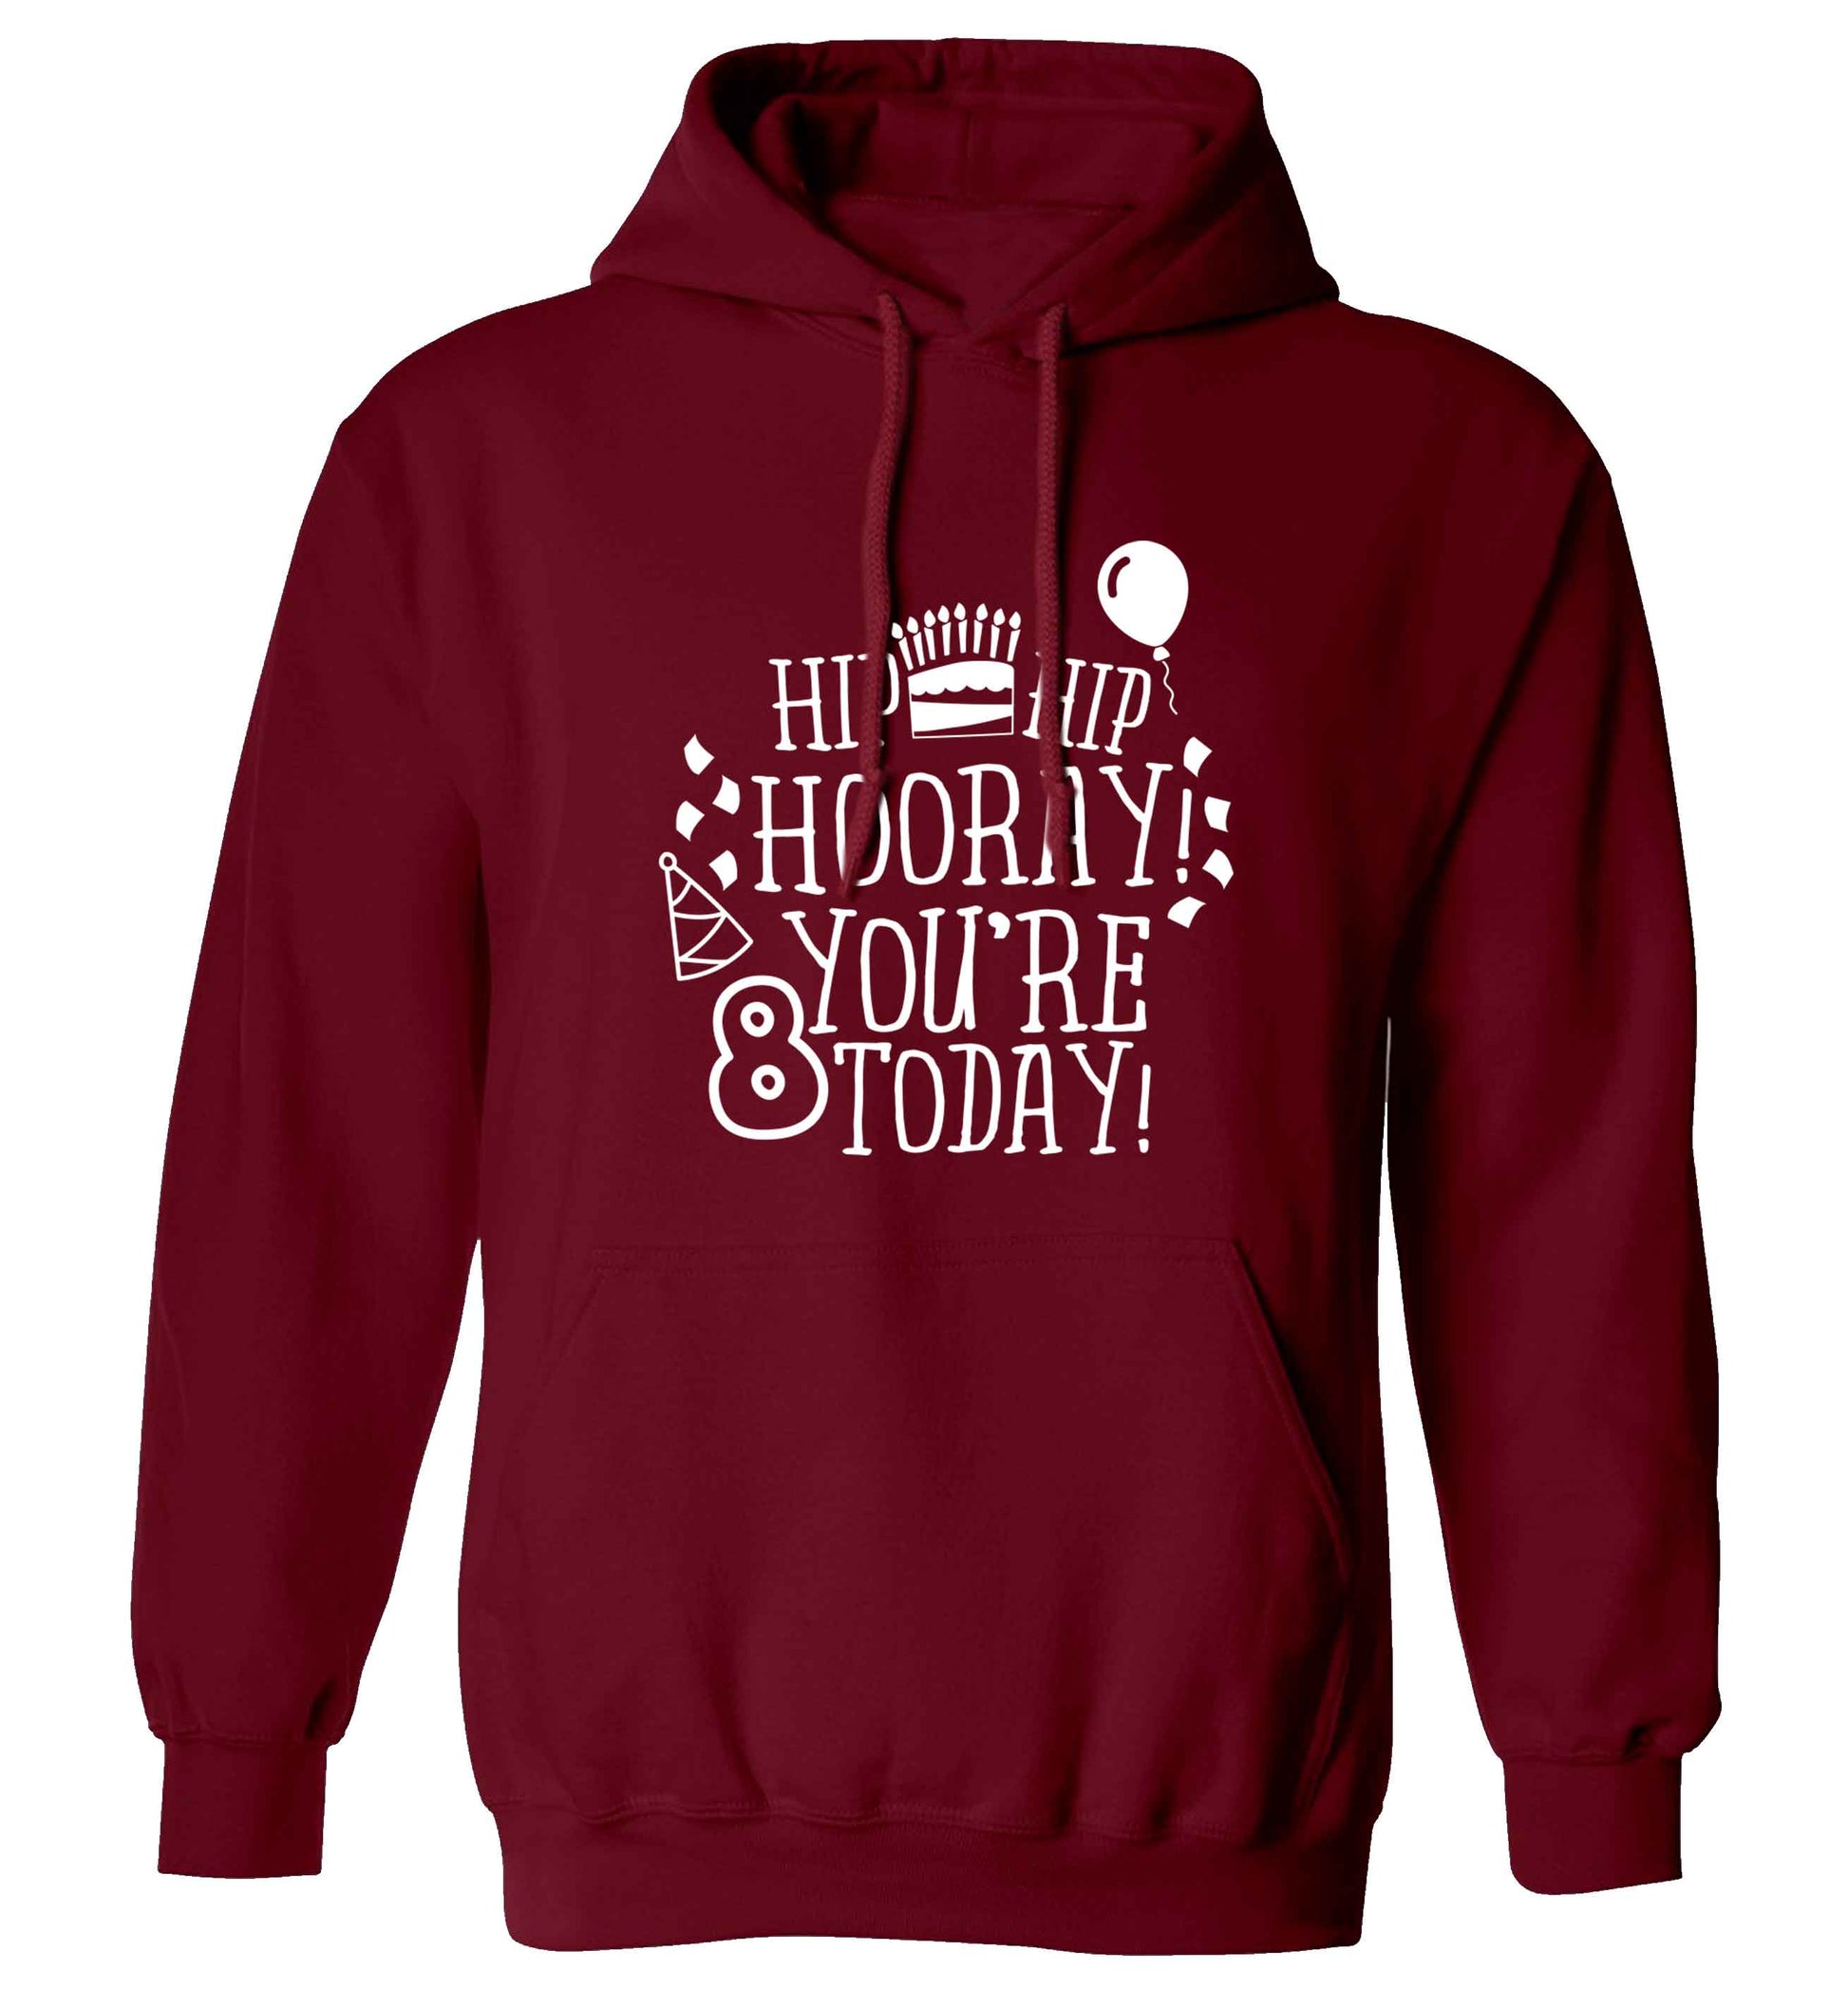 Hip hip hooray you're 8 today! adults unisex maroon hoodie 2XL